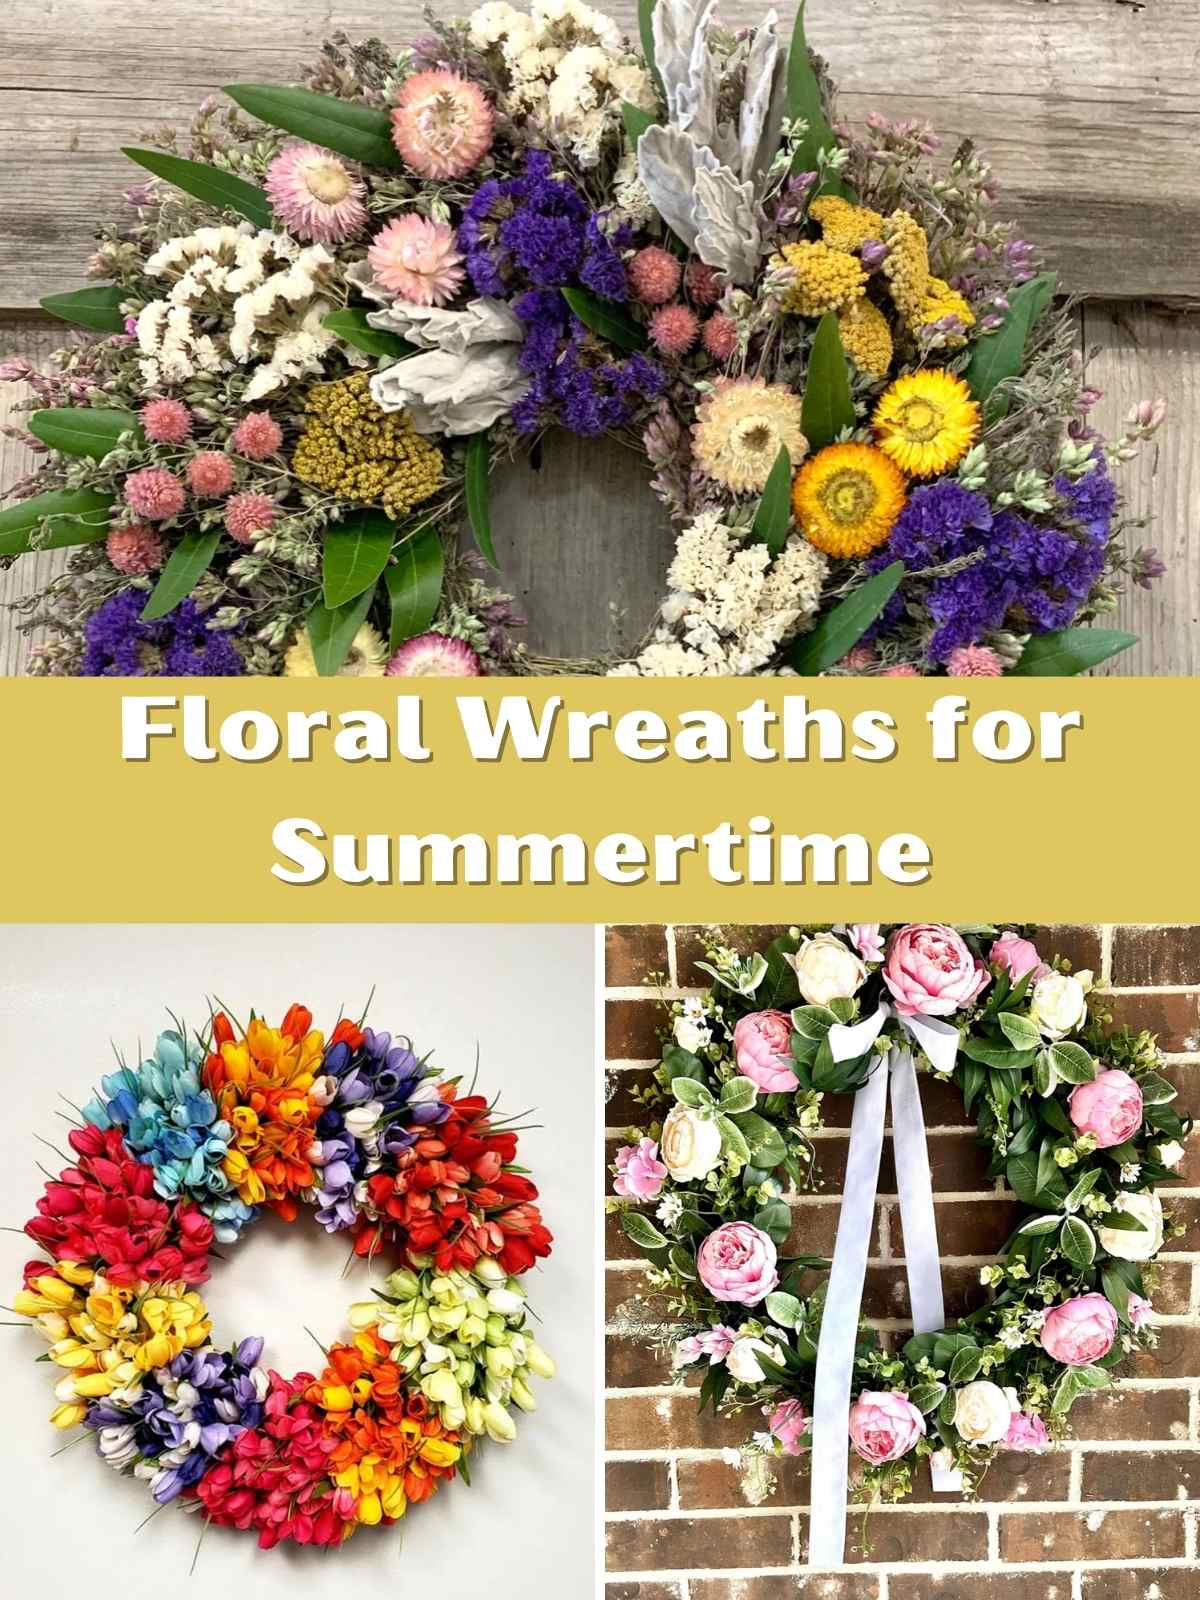 Floral Wreaths for Summertime. 3 Floral wreaths with bold colors.